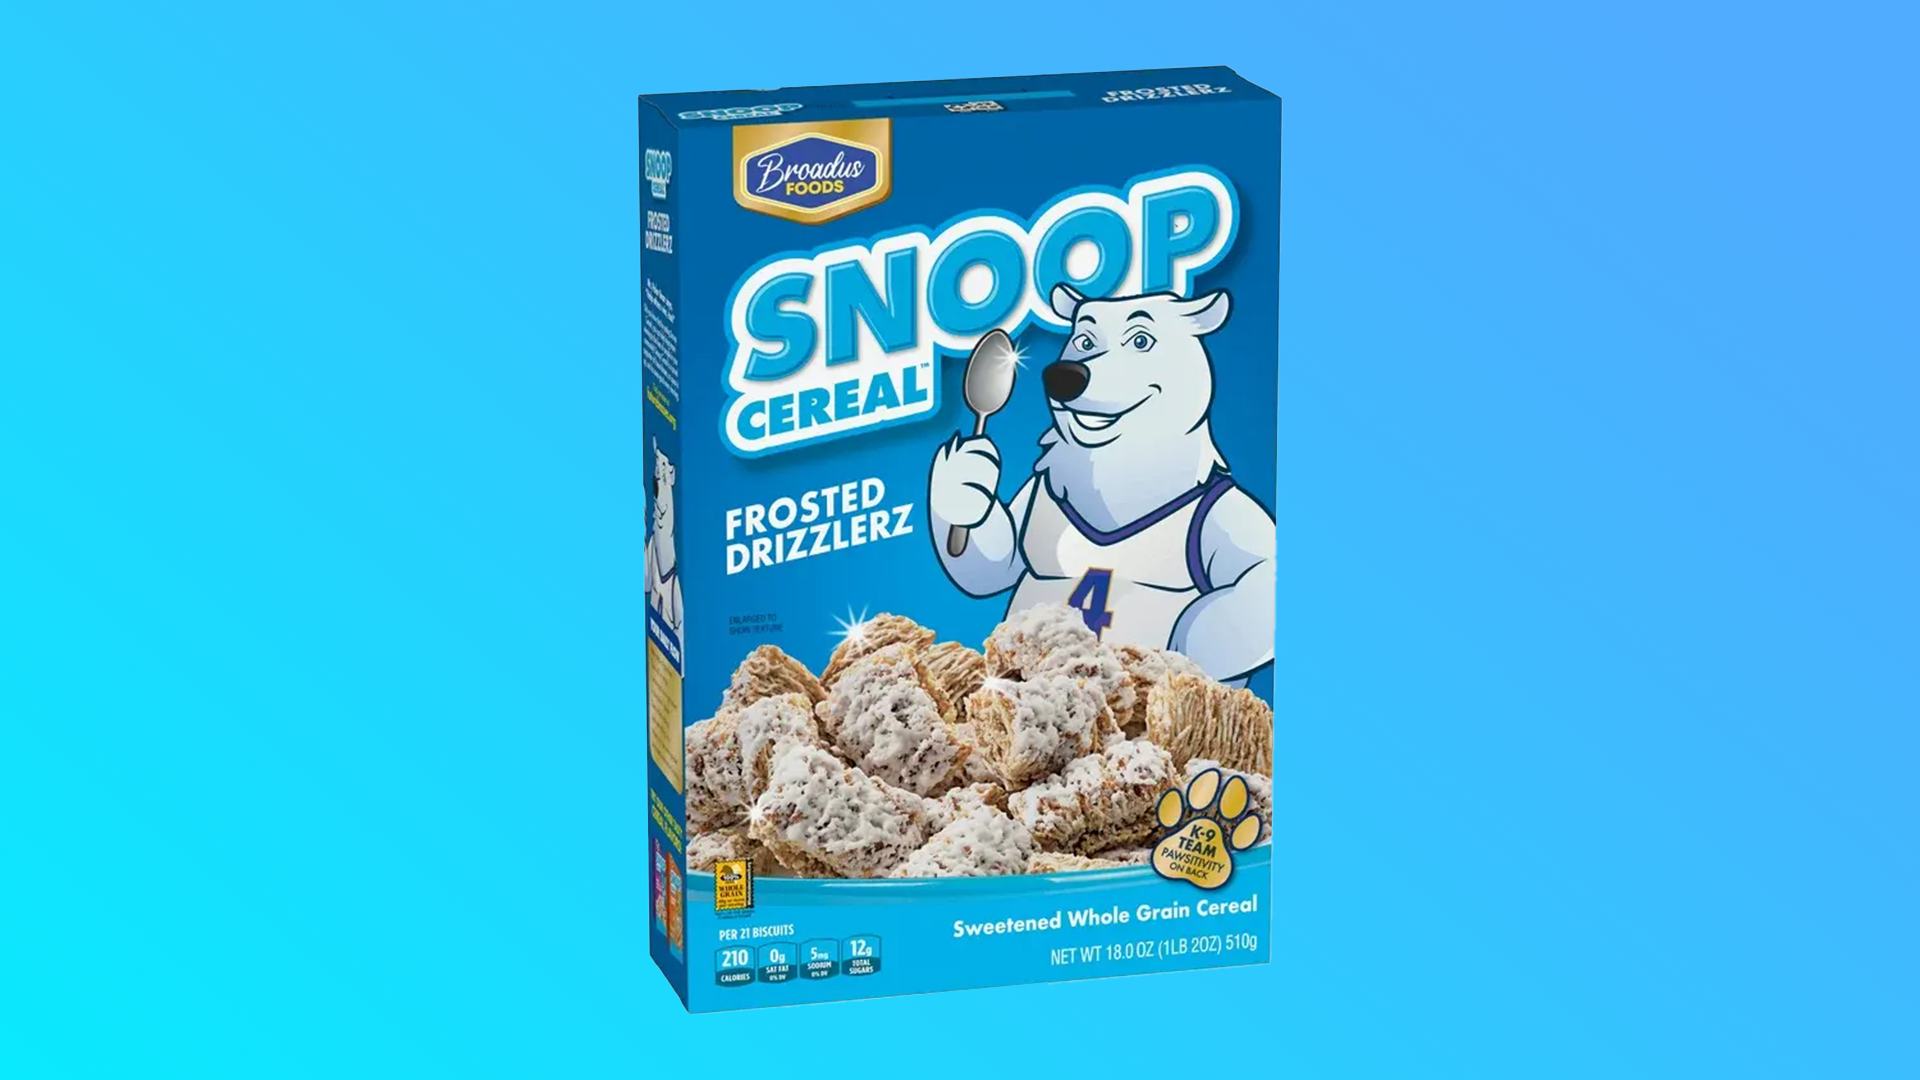 Snoop Dogg and Master P File Lawsuit Alleging Post and Walmart Intentionally Kept Snoop Cereal off Shelves